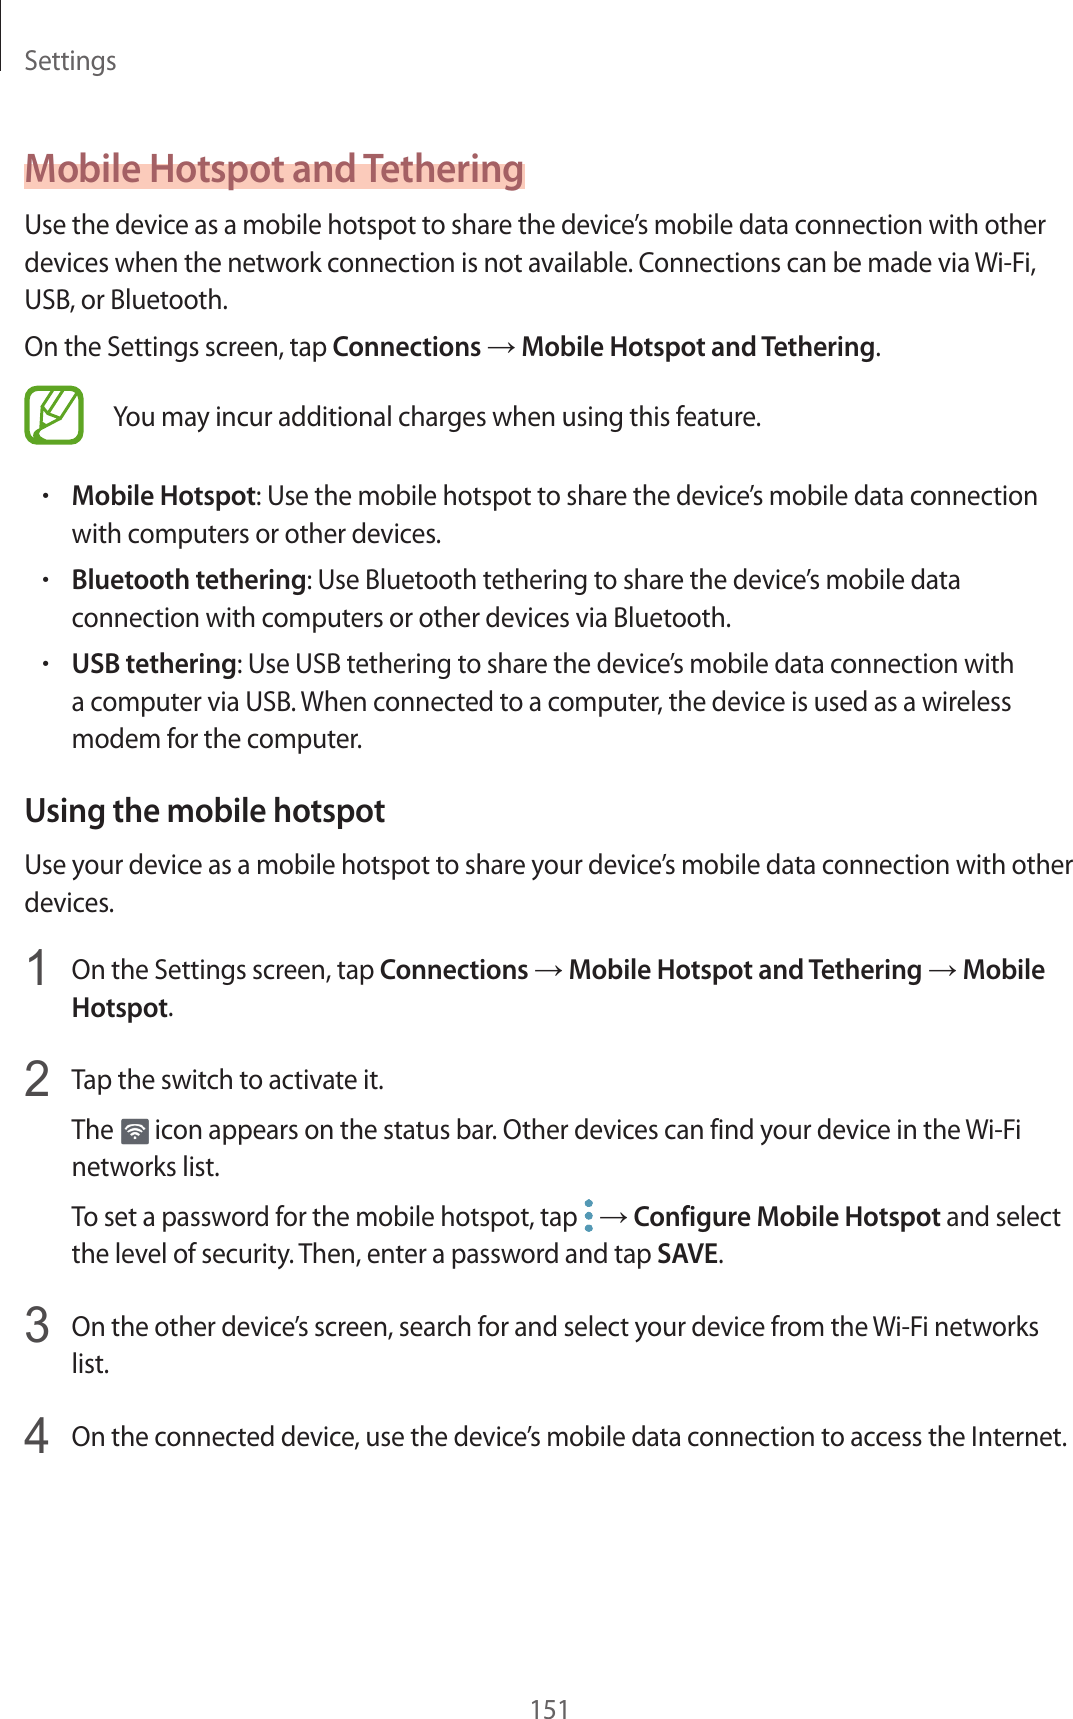 Settings151Mobile Hotspot and TetheringUse the device as a mobile hotspot to share the device’s mobile data connection with other devices when the network connection is not available. Connections can be made via Wi-Fi, USB, or Bluetooth.On the Settings screen, tap Connections → Mobile Hotspot and Tethering.You may incur additional charges when using this feature.•Mobile Hotspot: Use the mobile hotspot to share the device’s mobile data connection with computers or other devices.•Bluetooth tethering: Use Bluetooth tethering to share the device’s mobile data connection with computers or other devices via Bluetooth.•USB tethering: Use USB tethering to share the device’s mobile data connection with a computer via USB. When connected to a computer, the device is used as a wireless modem for the computer.Using the mobile hotspotUse your device as a mobile hotspot to share your device’s mobile data connection with other devices.1  On the Settings screen, tap Connections → Mobile Hotspot and Tethering → Mobile Hotspot.2  Tap the switch to activate it.The   icon appears on the status bar. Other devices can find your device in the Wi-Fi networks list.To set a password for the mobile hotspot, tap   → Configure Mobile Hotspot and select the level of security. Then, enter a password and tap SAVE.3  On the other device’s screen, search for and select your device from the Wi-Fi networks list.4  On the connected device, use the device’s mobile data connection to access the Internet.